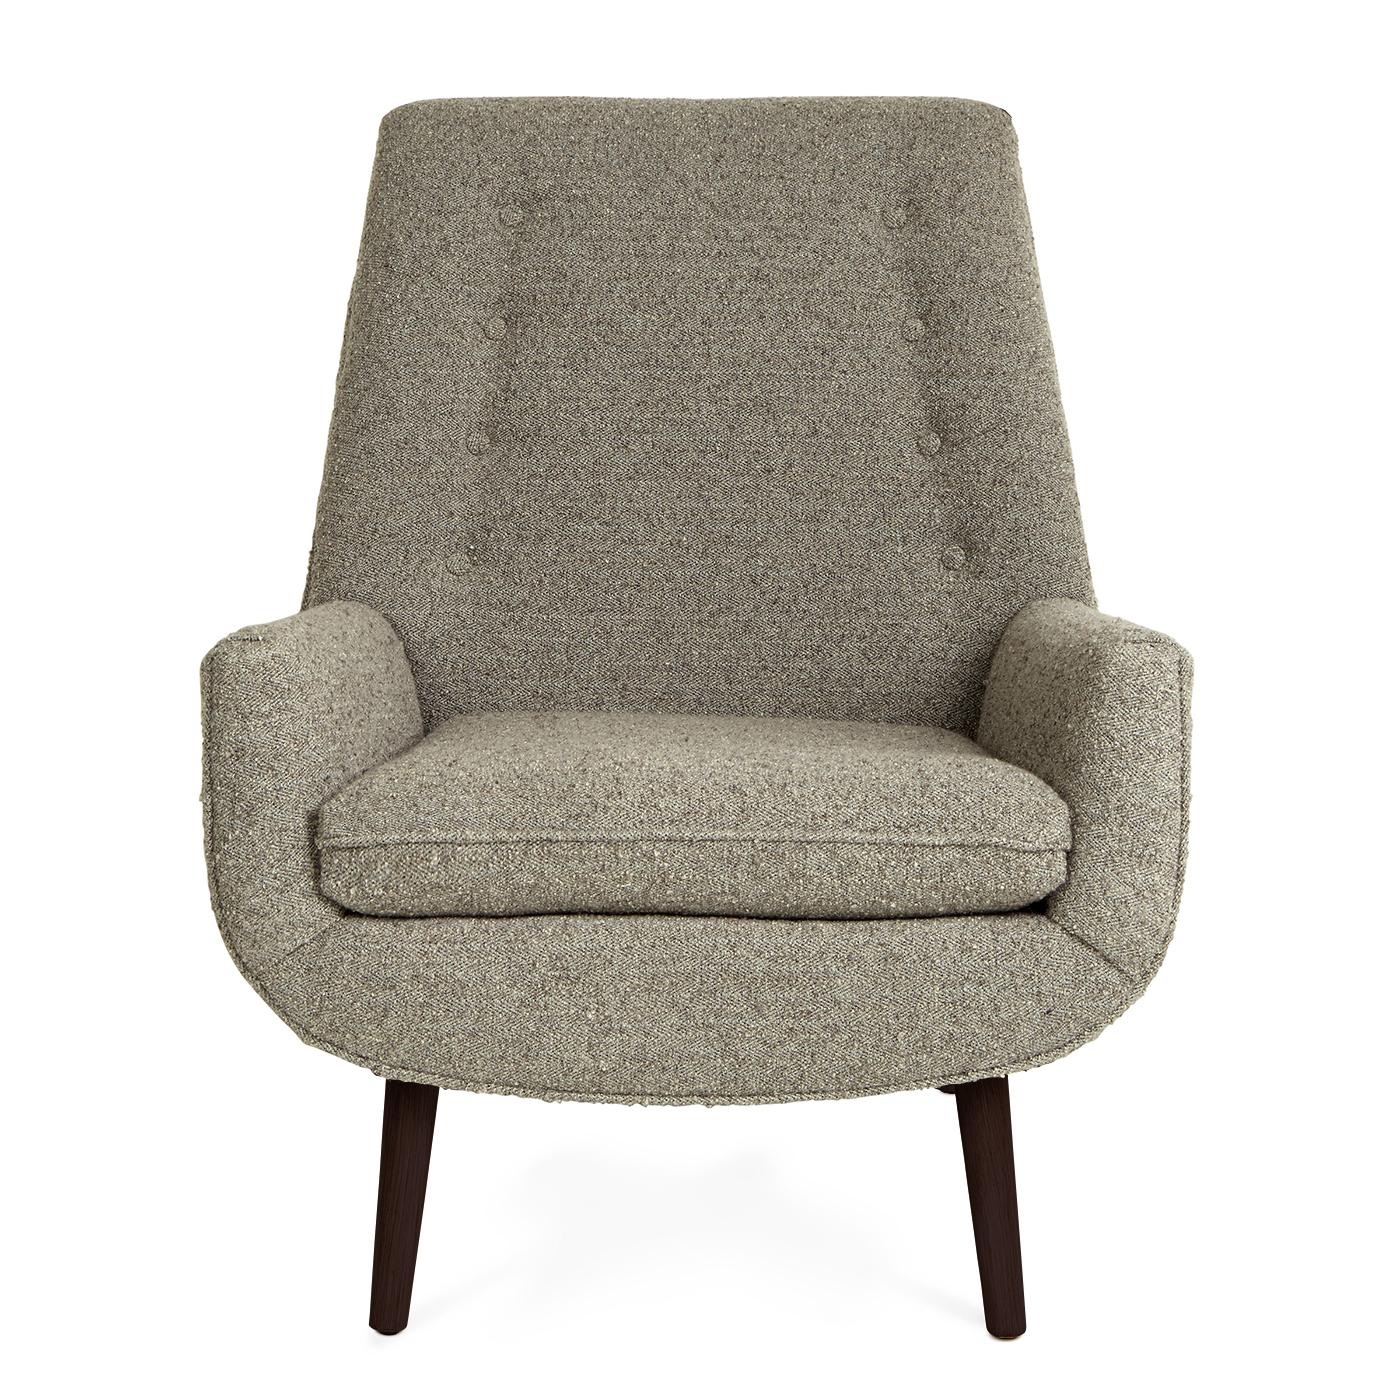 Perfect Pitch. A scaled-up version of our Mrs. Godfrey chair, our Mr. Godfrey chair speaks with a more commanding voice. It boasts a deeper pitch and thicker cushions for a clubbier persona. This dapper style is finished with piped edges and buttons